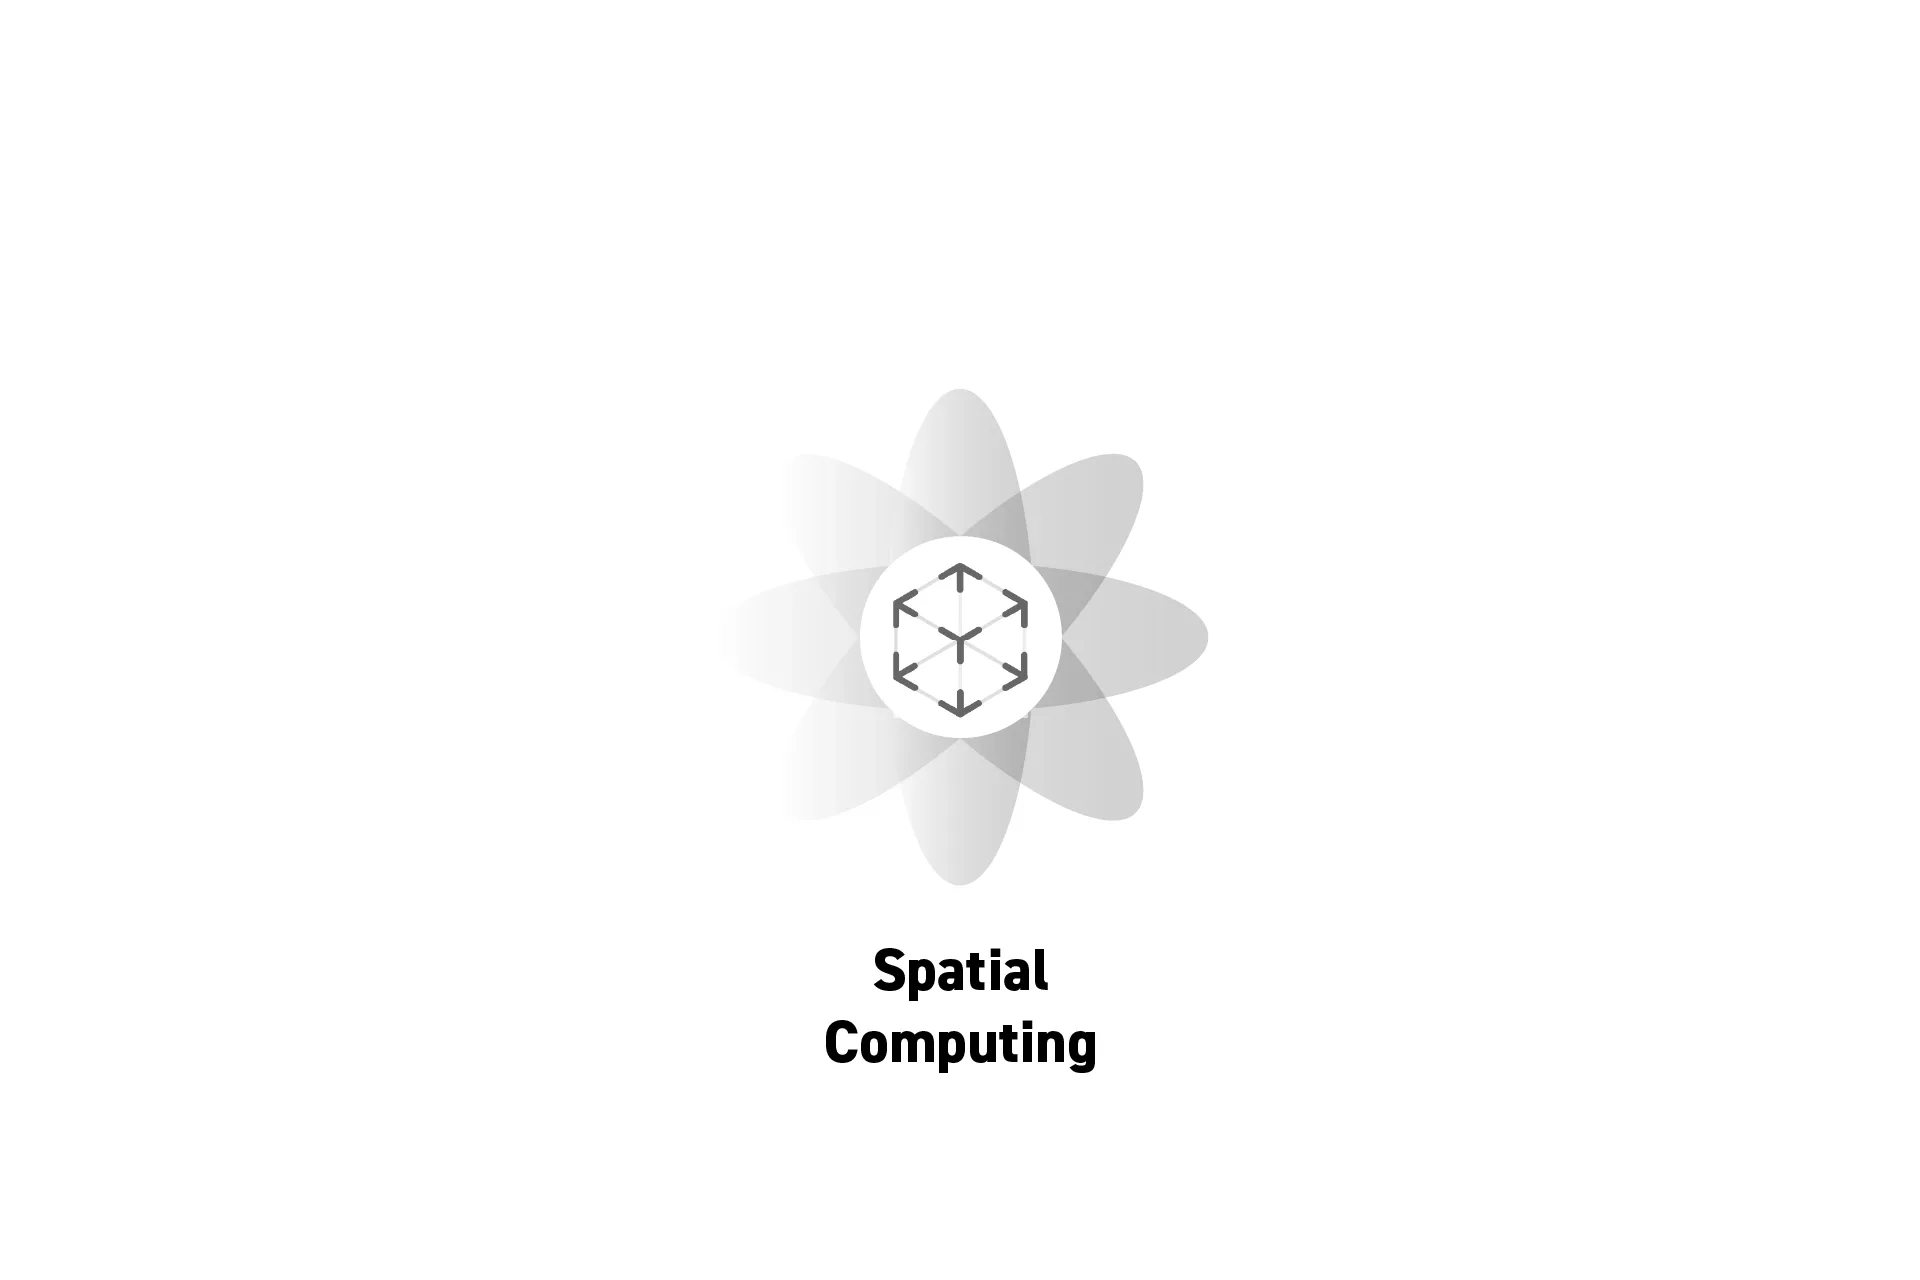 A flower that represents spatial computing with the text "Spatial Computing" beneath it.